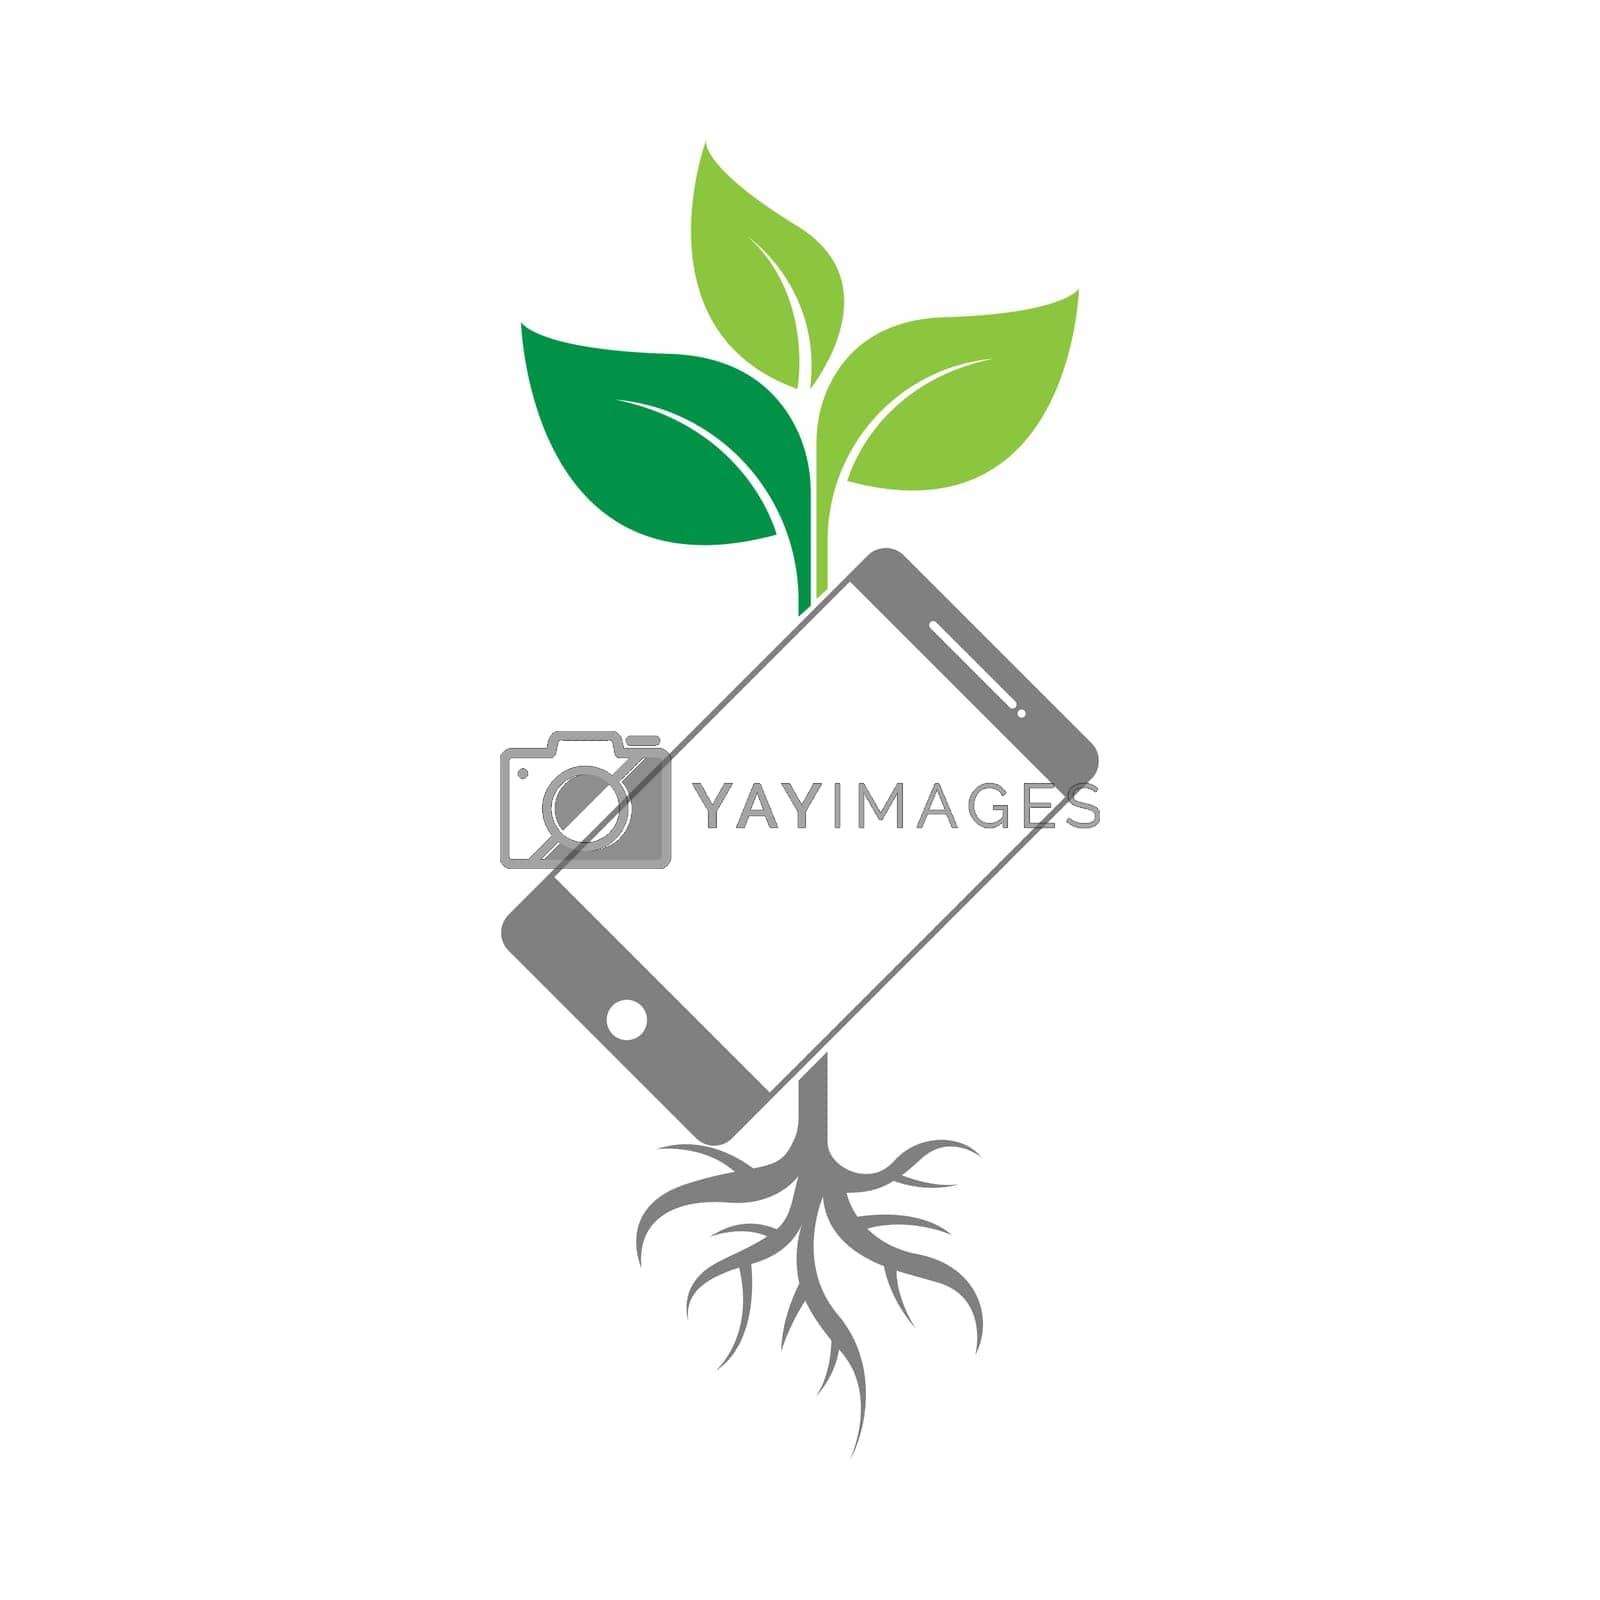 Royalty free image of Agriculture logo icon design illustration by bellaxbudhong3